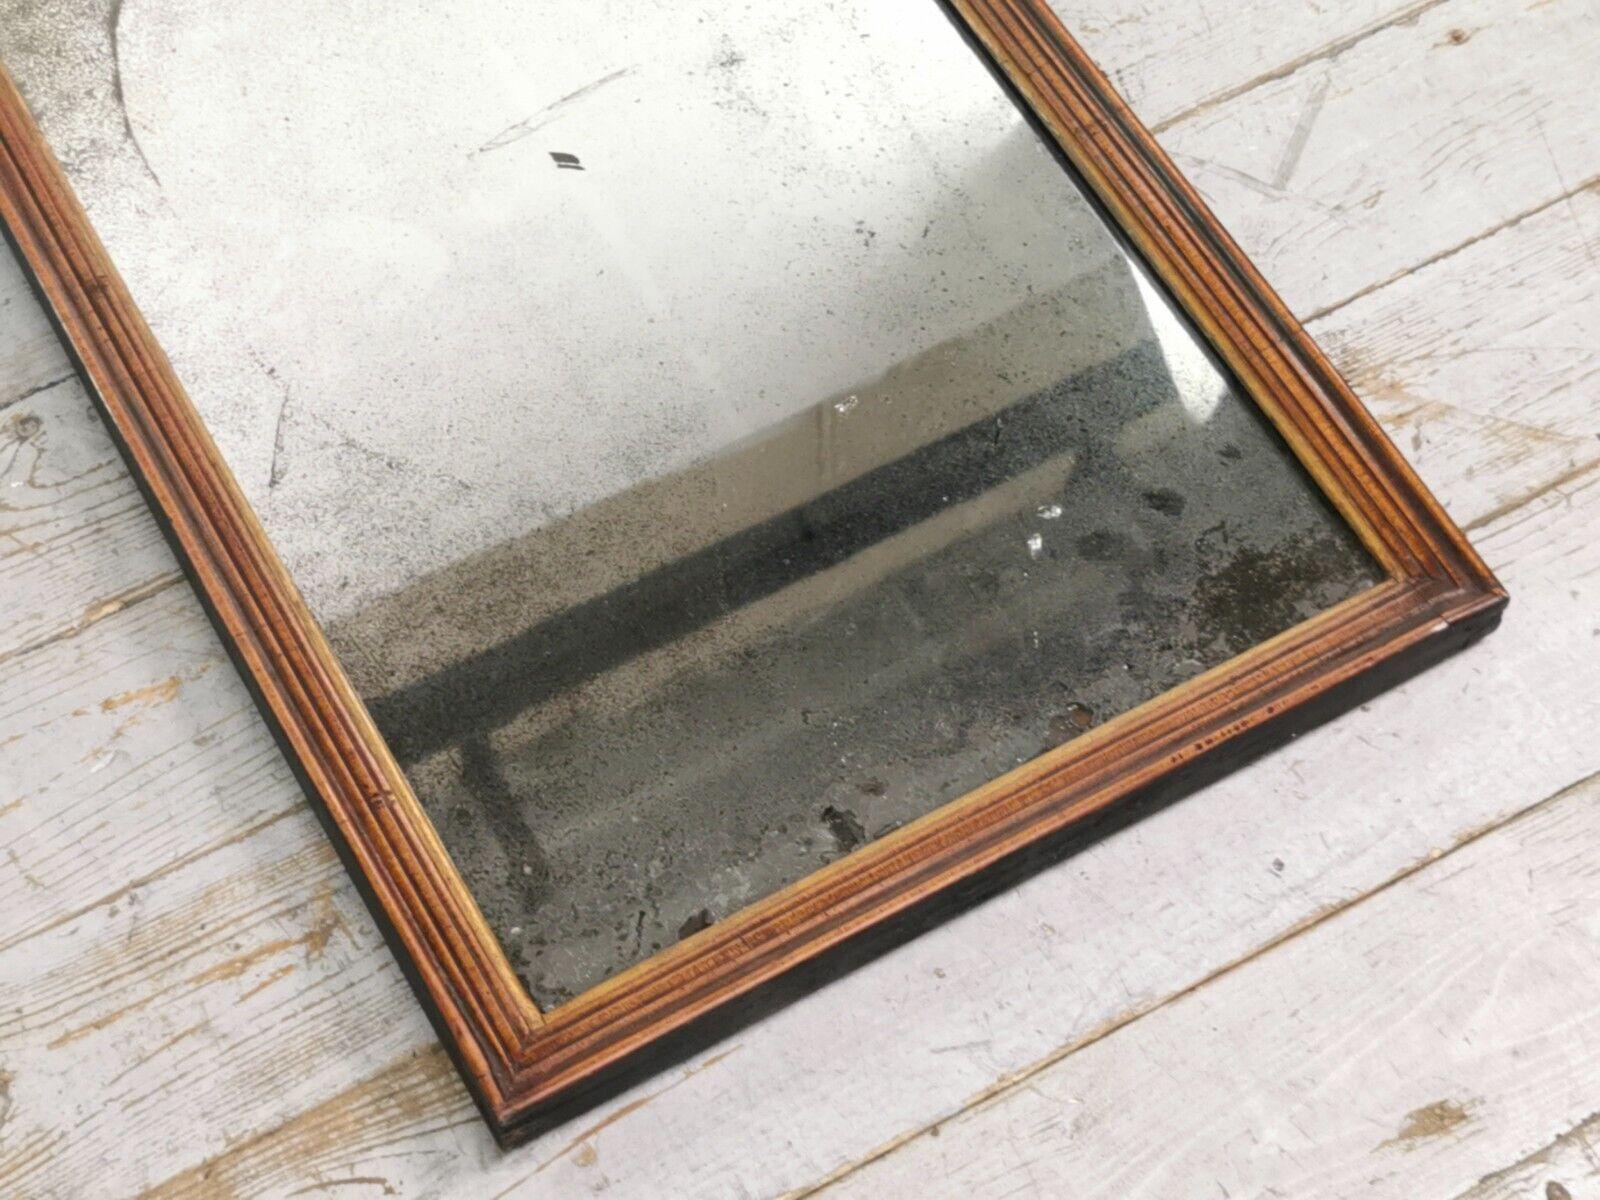 Late 19th Century Antique Distressed Rectangular Wall Mirror

A late 19th century rectangular wall mirror, wonderfully aged distressed plate and deep-toned characterful mahogany frame.

Dimensions (cm): 

73 H x 45 W x 3 D

Condition:

Great antique